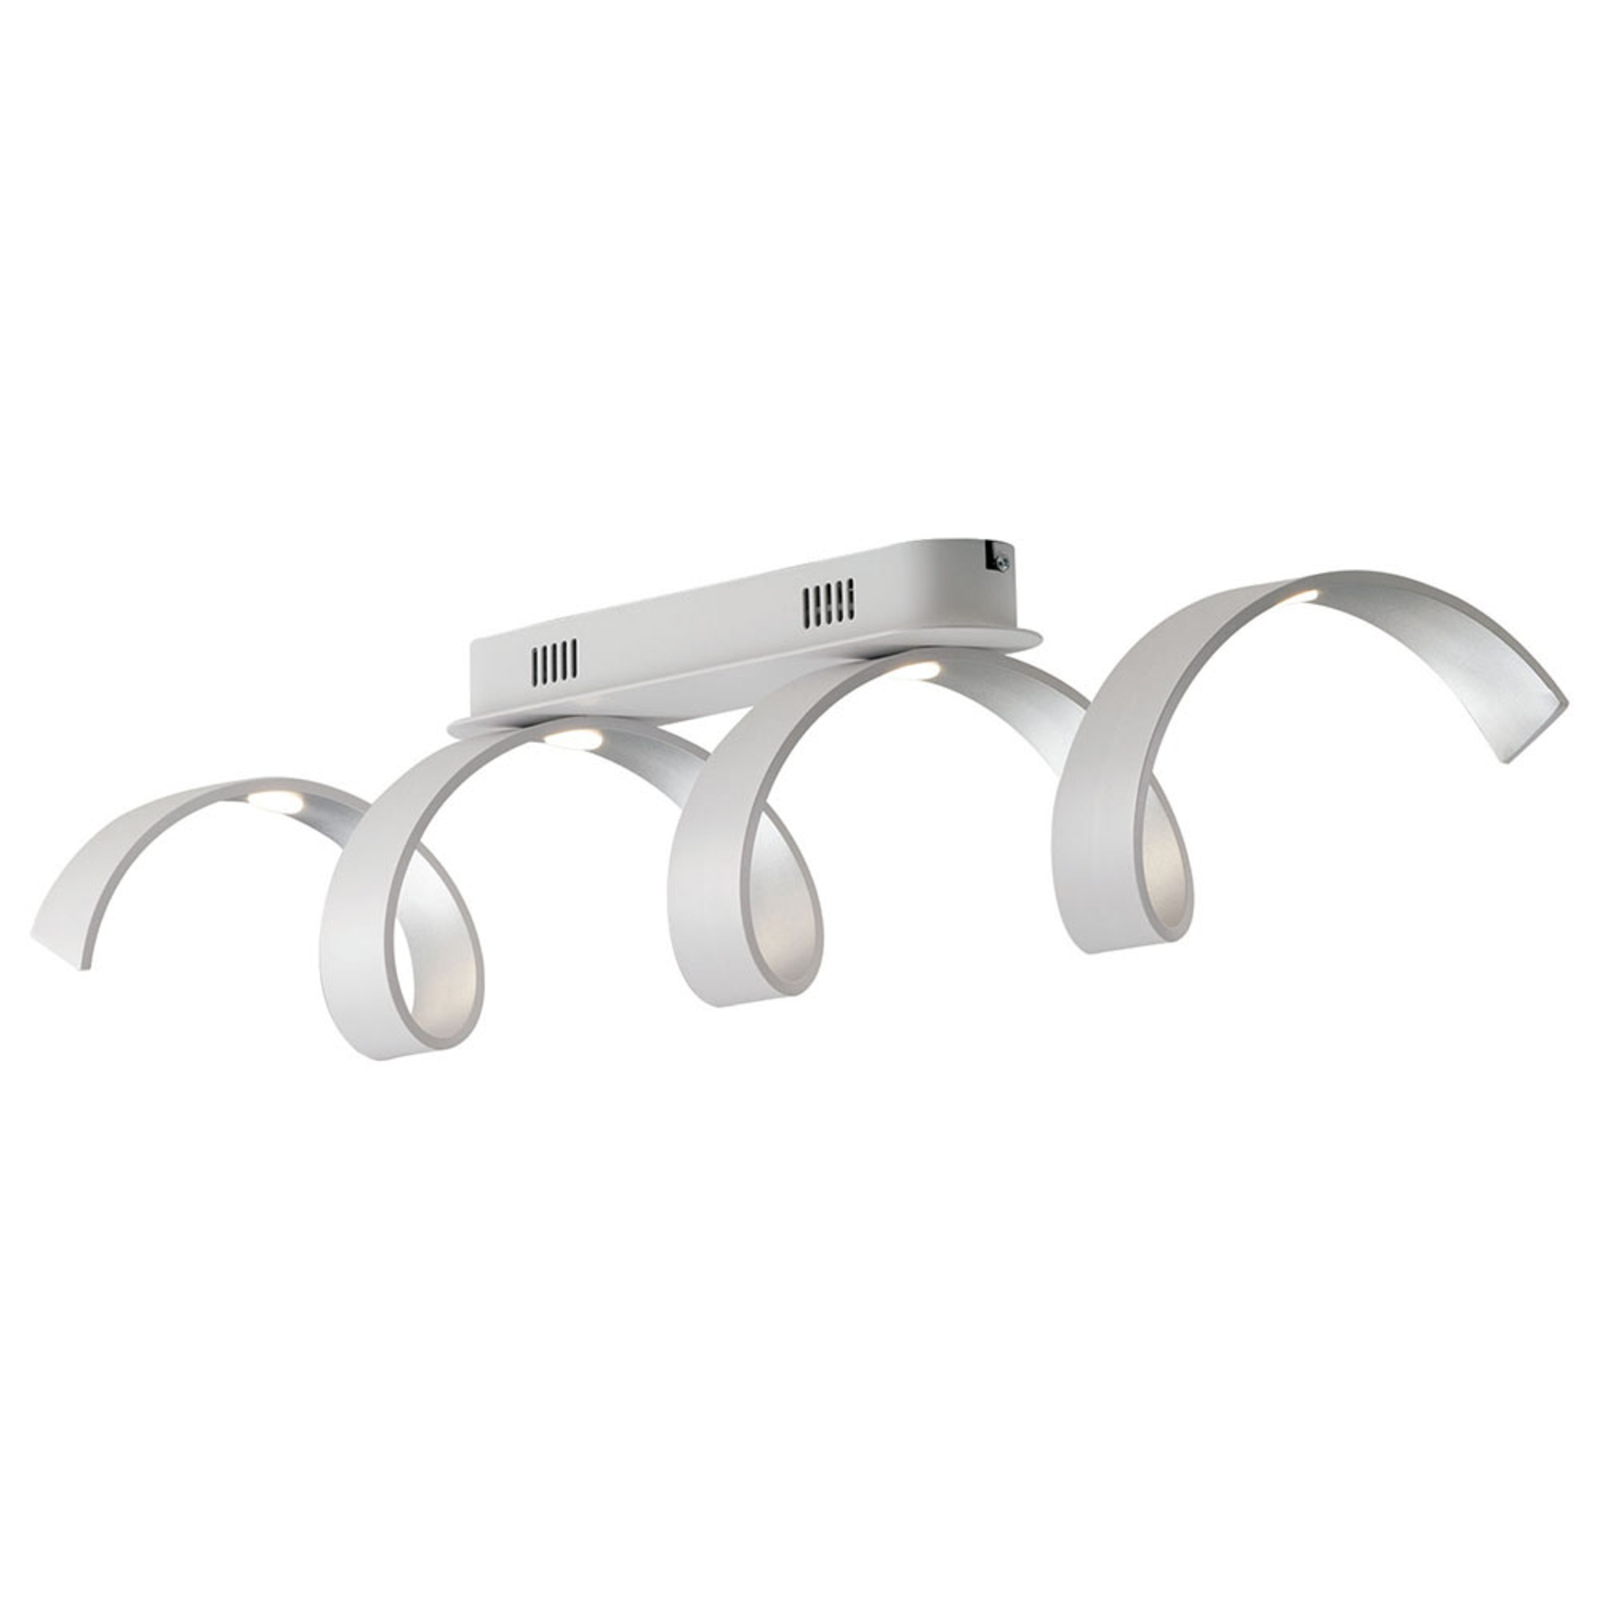 Helix LED ceiling light in white and silver